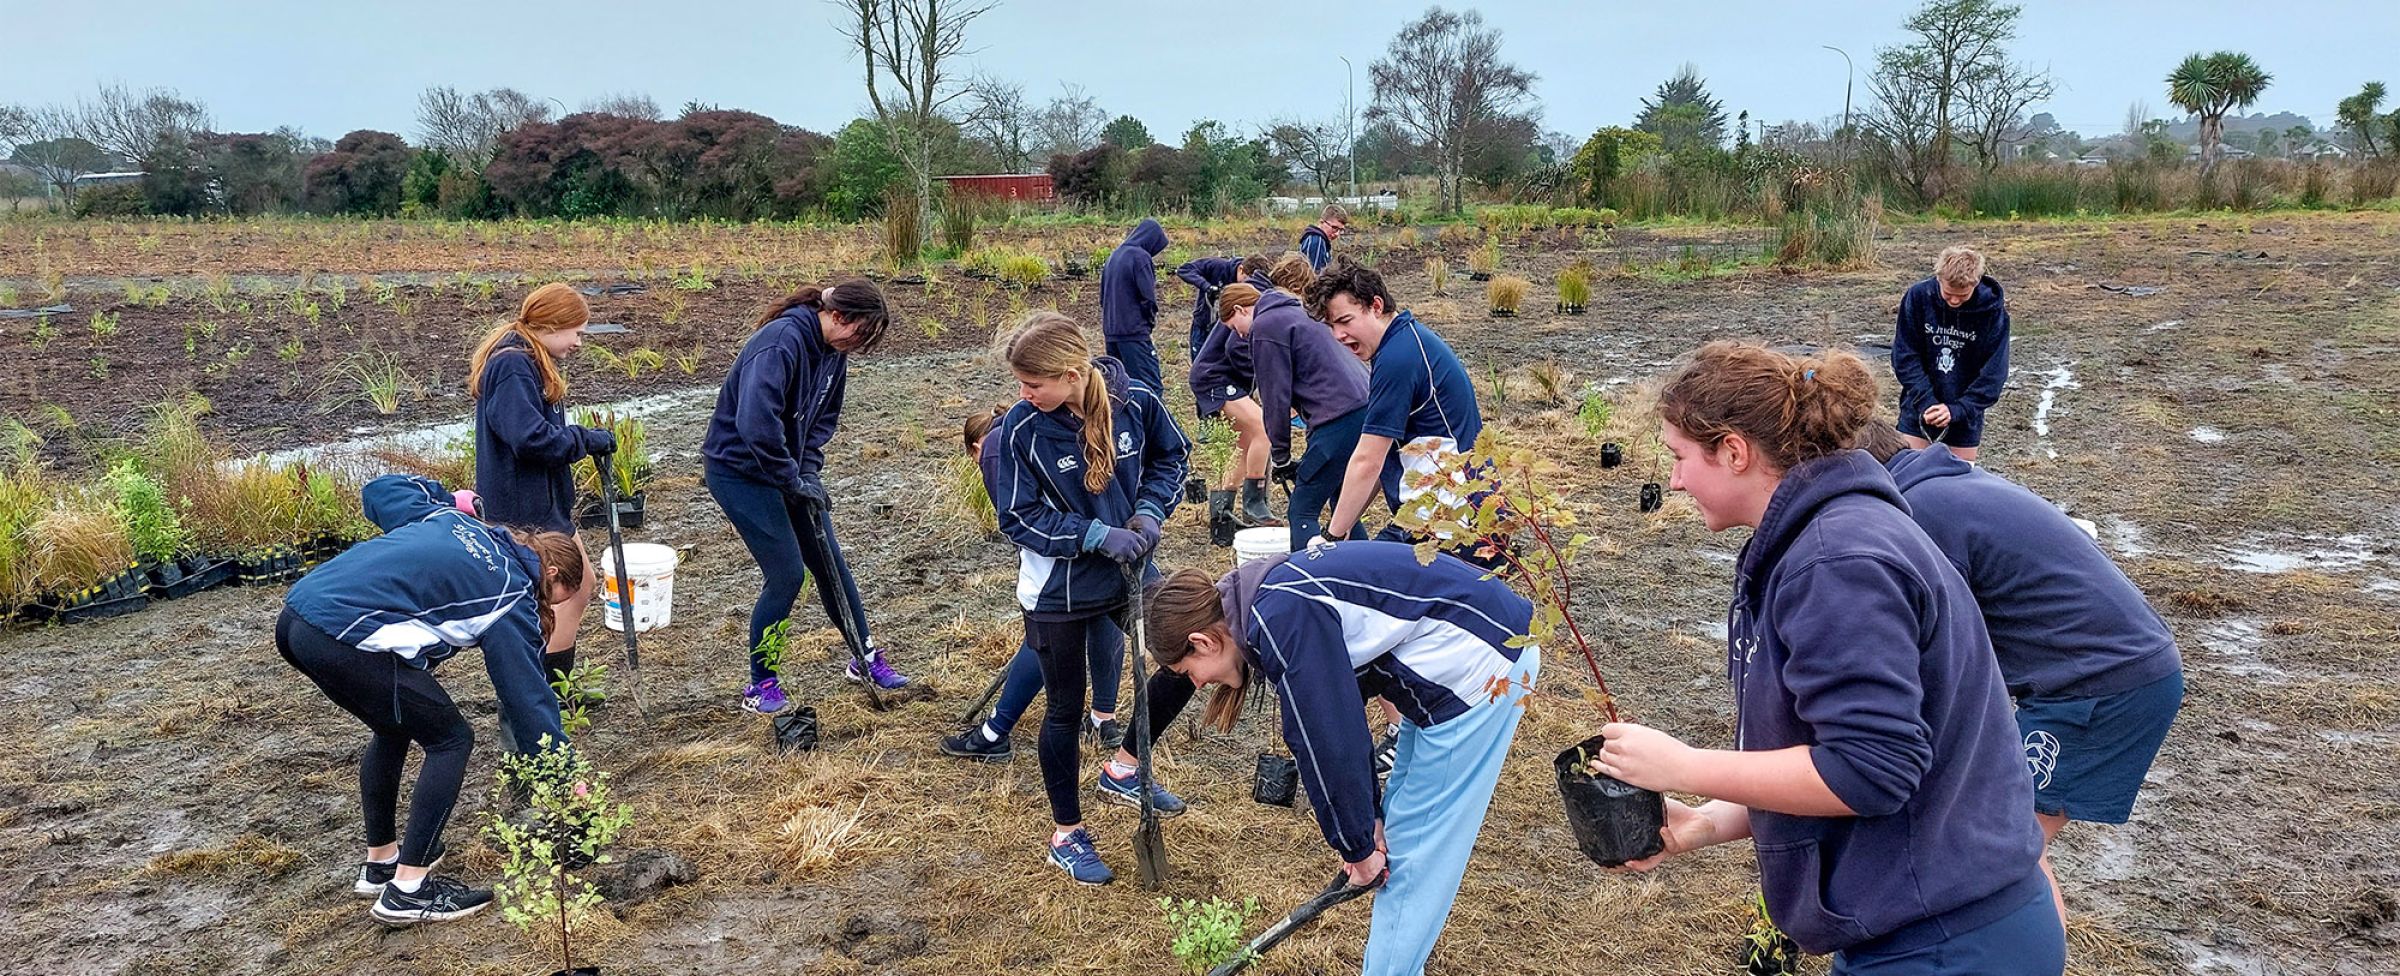 Students planting trees in the Christchurch redzone.